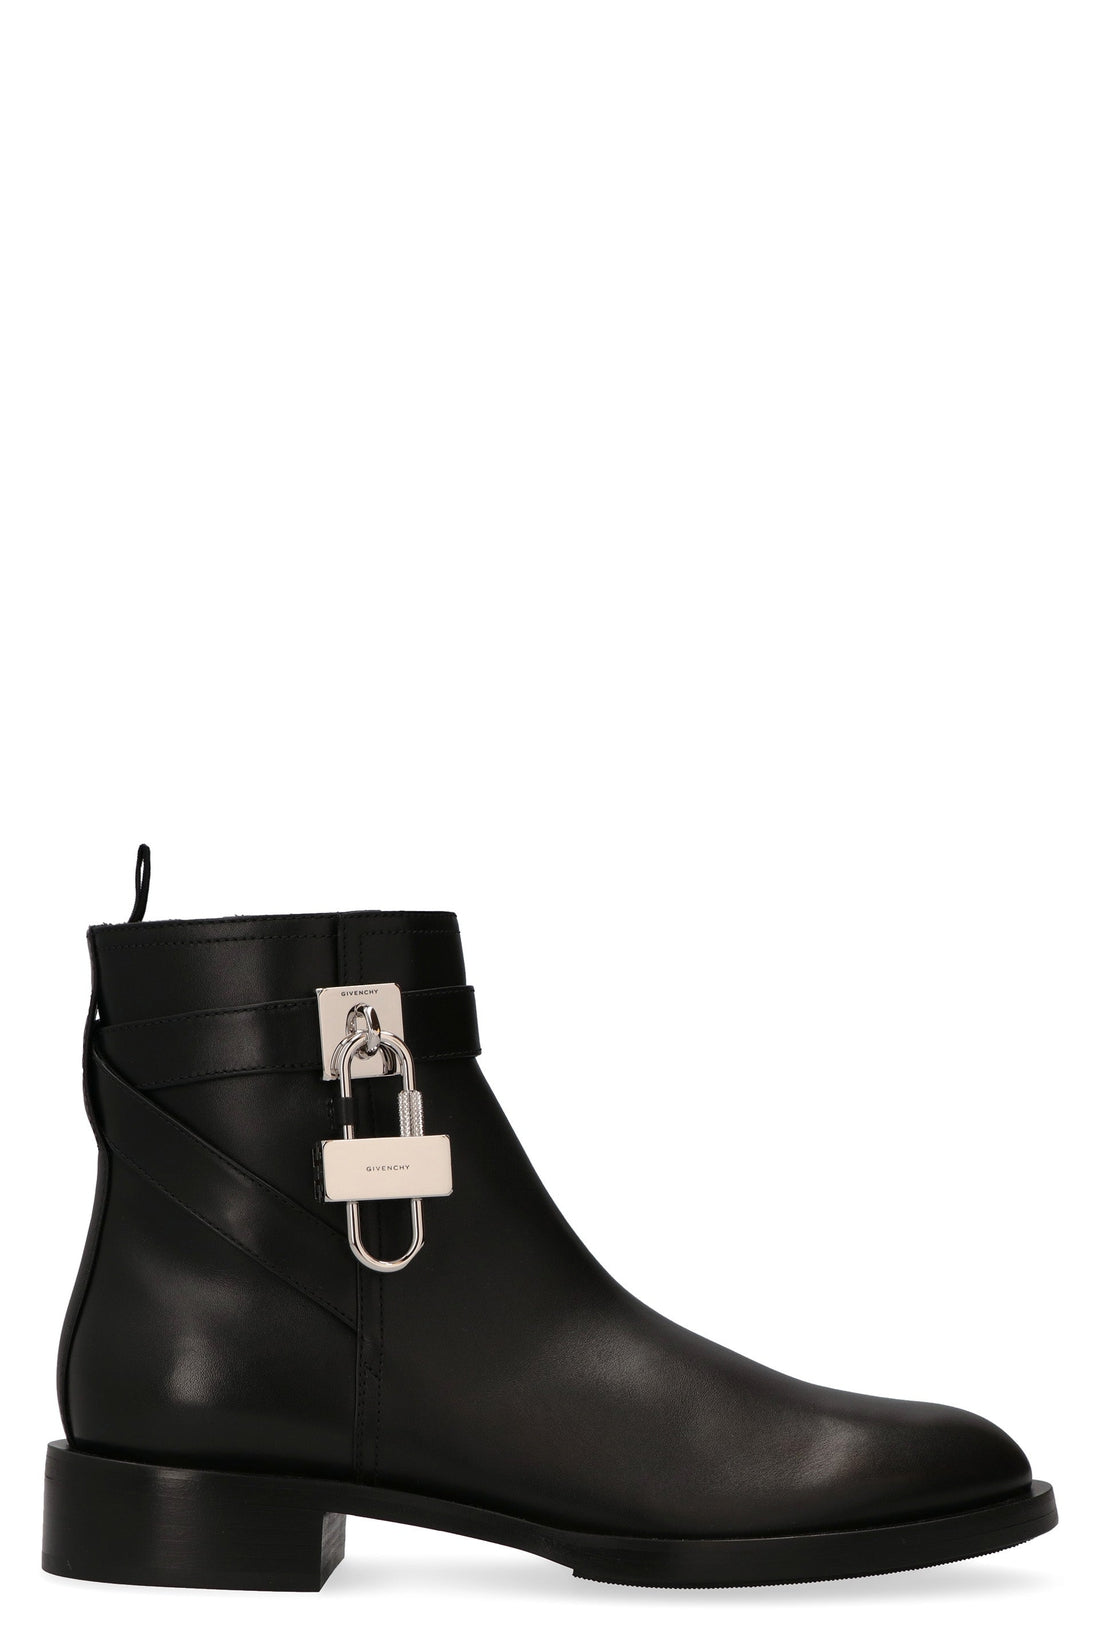 Givenchy-OUTLET-SALE-Lock leather ankle boots-ARCHIVIST